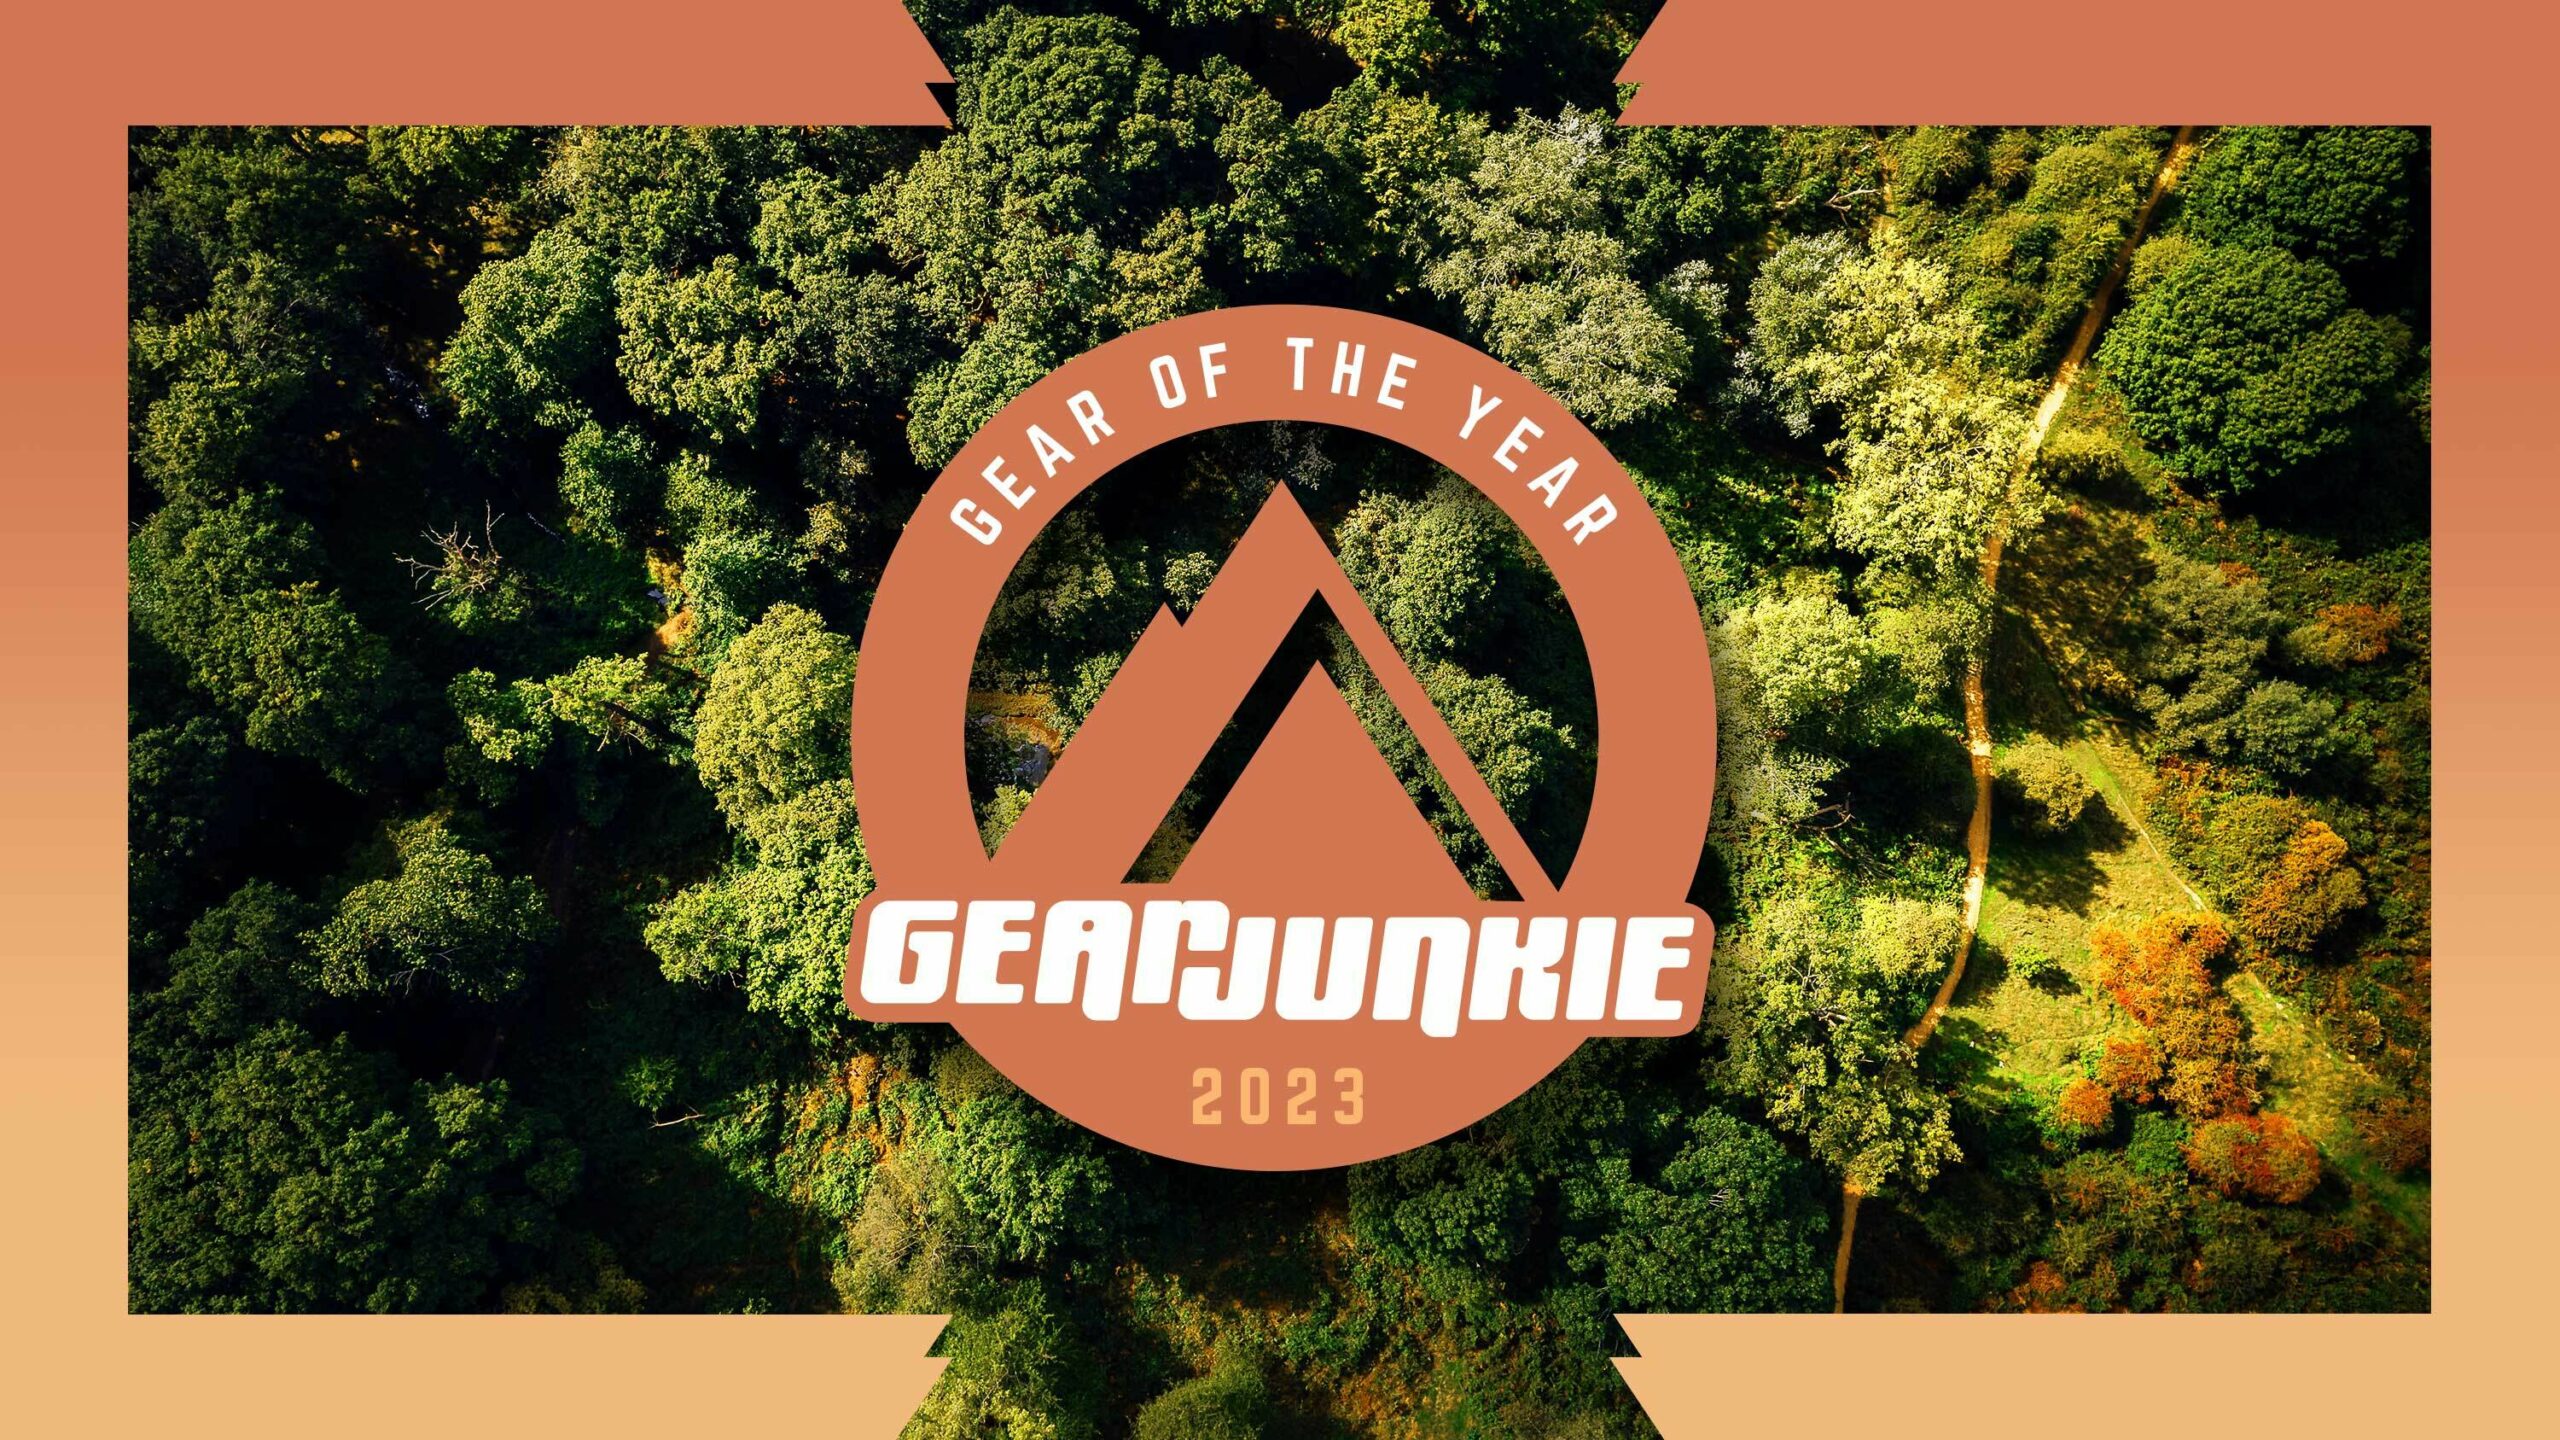 Gear of the Year: GearJunkie Editors Reveal Their Top Picks From 2023